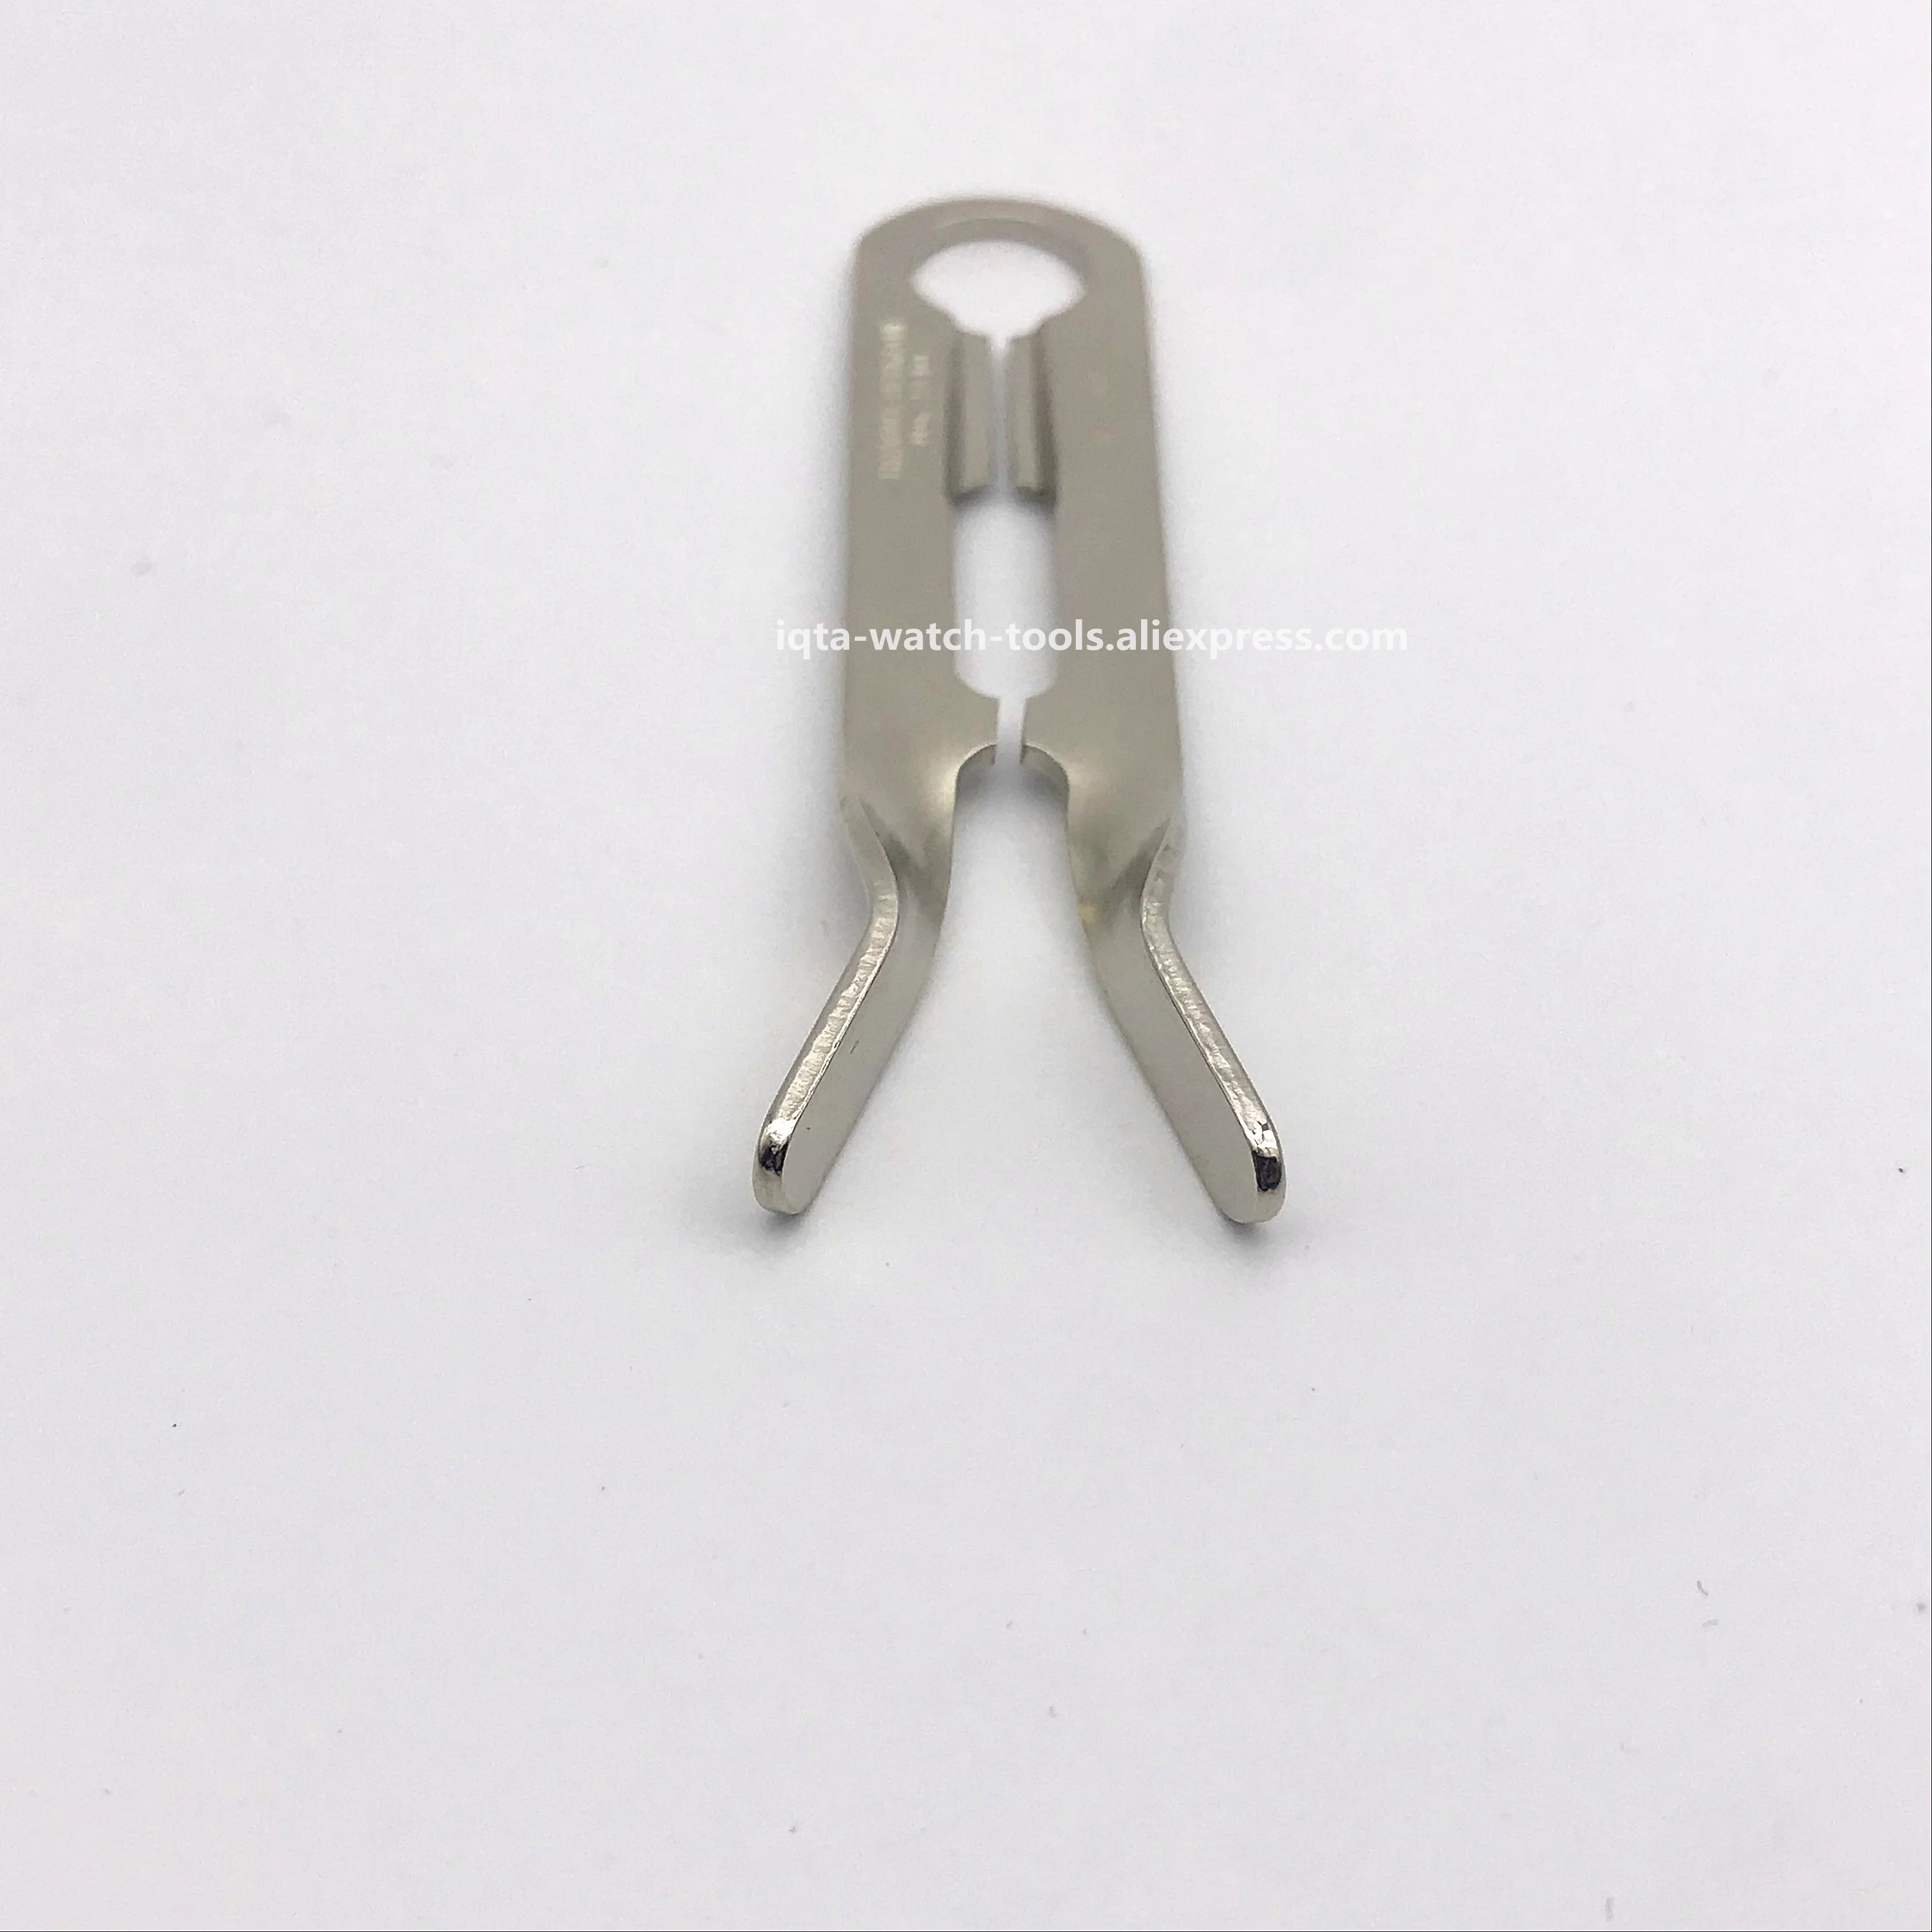 Bergeon 2810 Roller Remover Plier Shaped Watch Repair Tools 